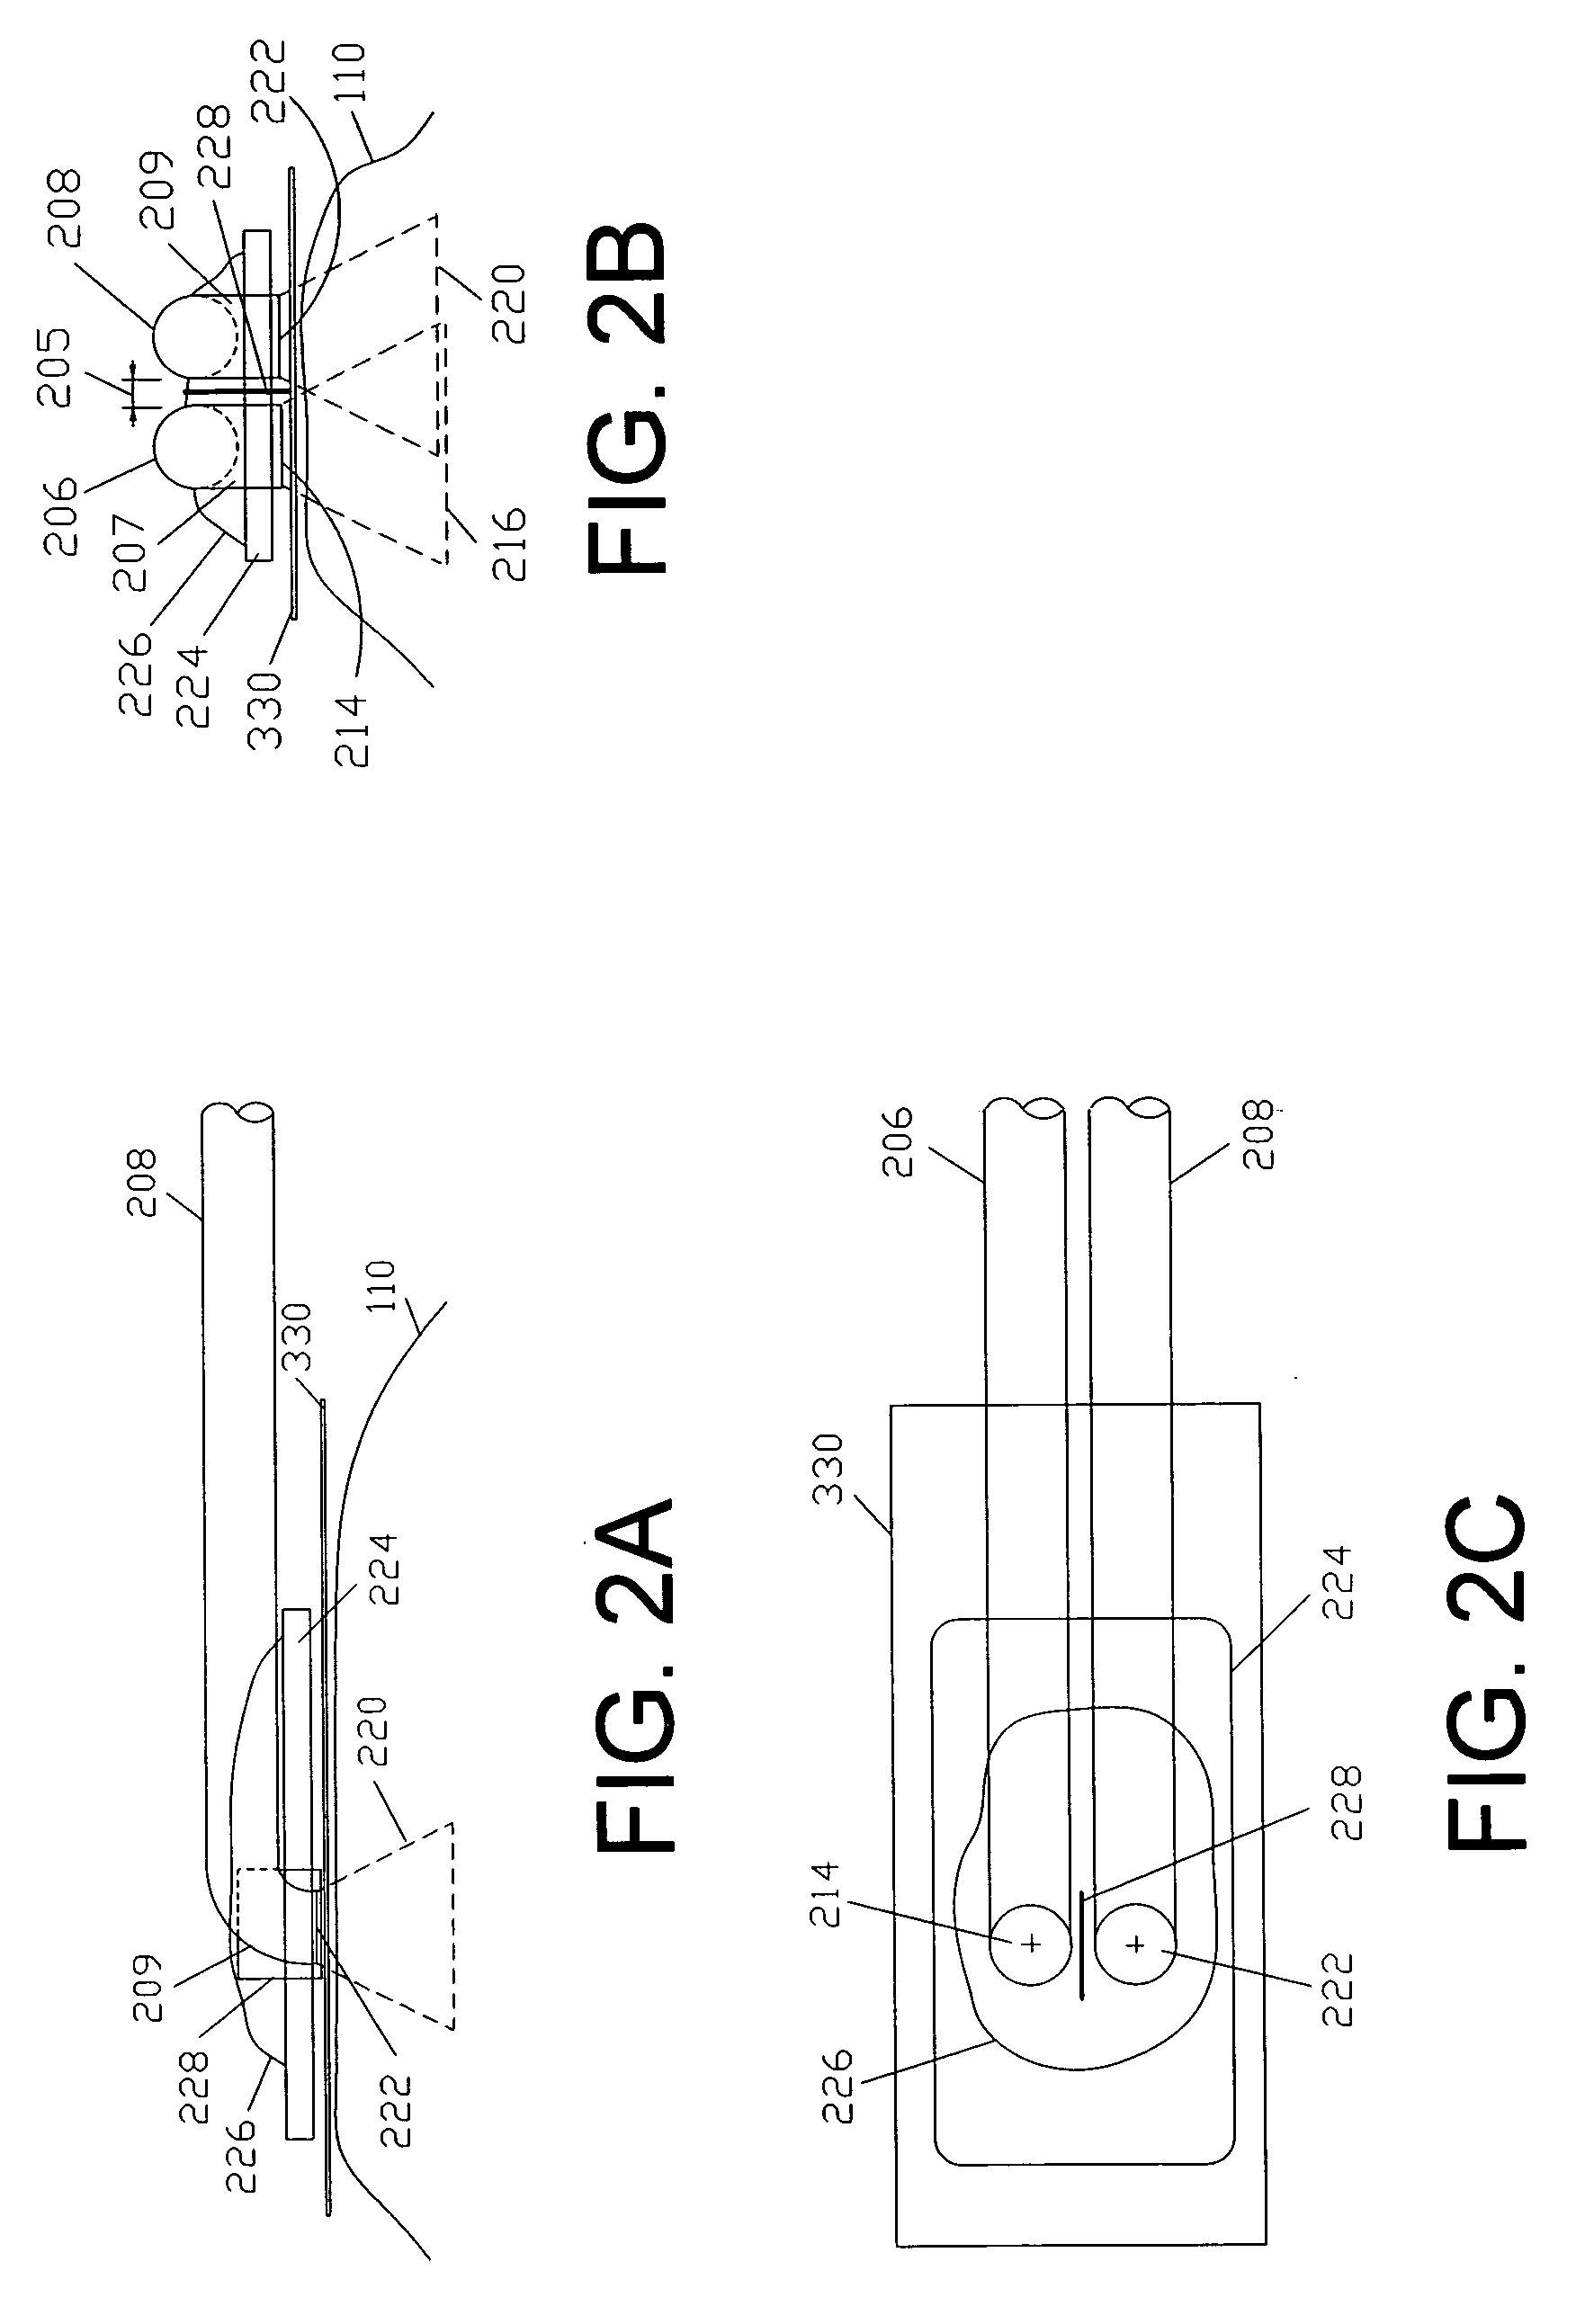 Methods and sensors for monitoring internal tissue conditions